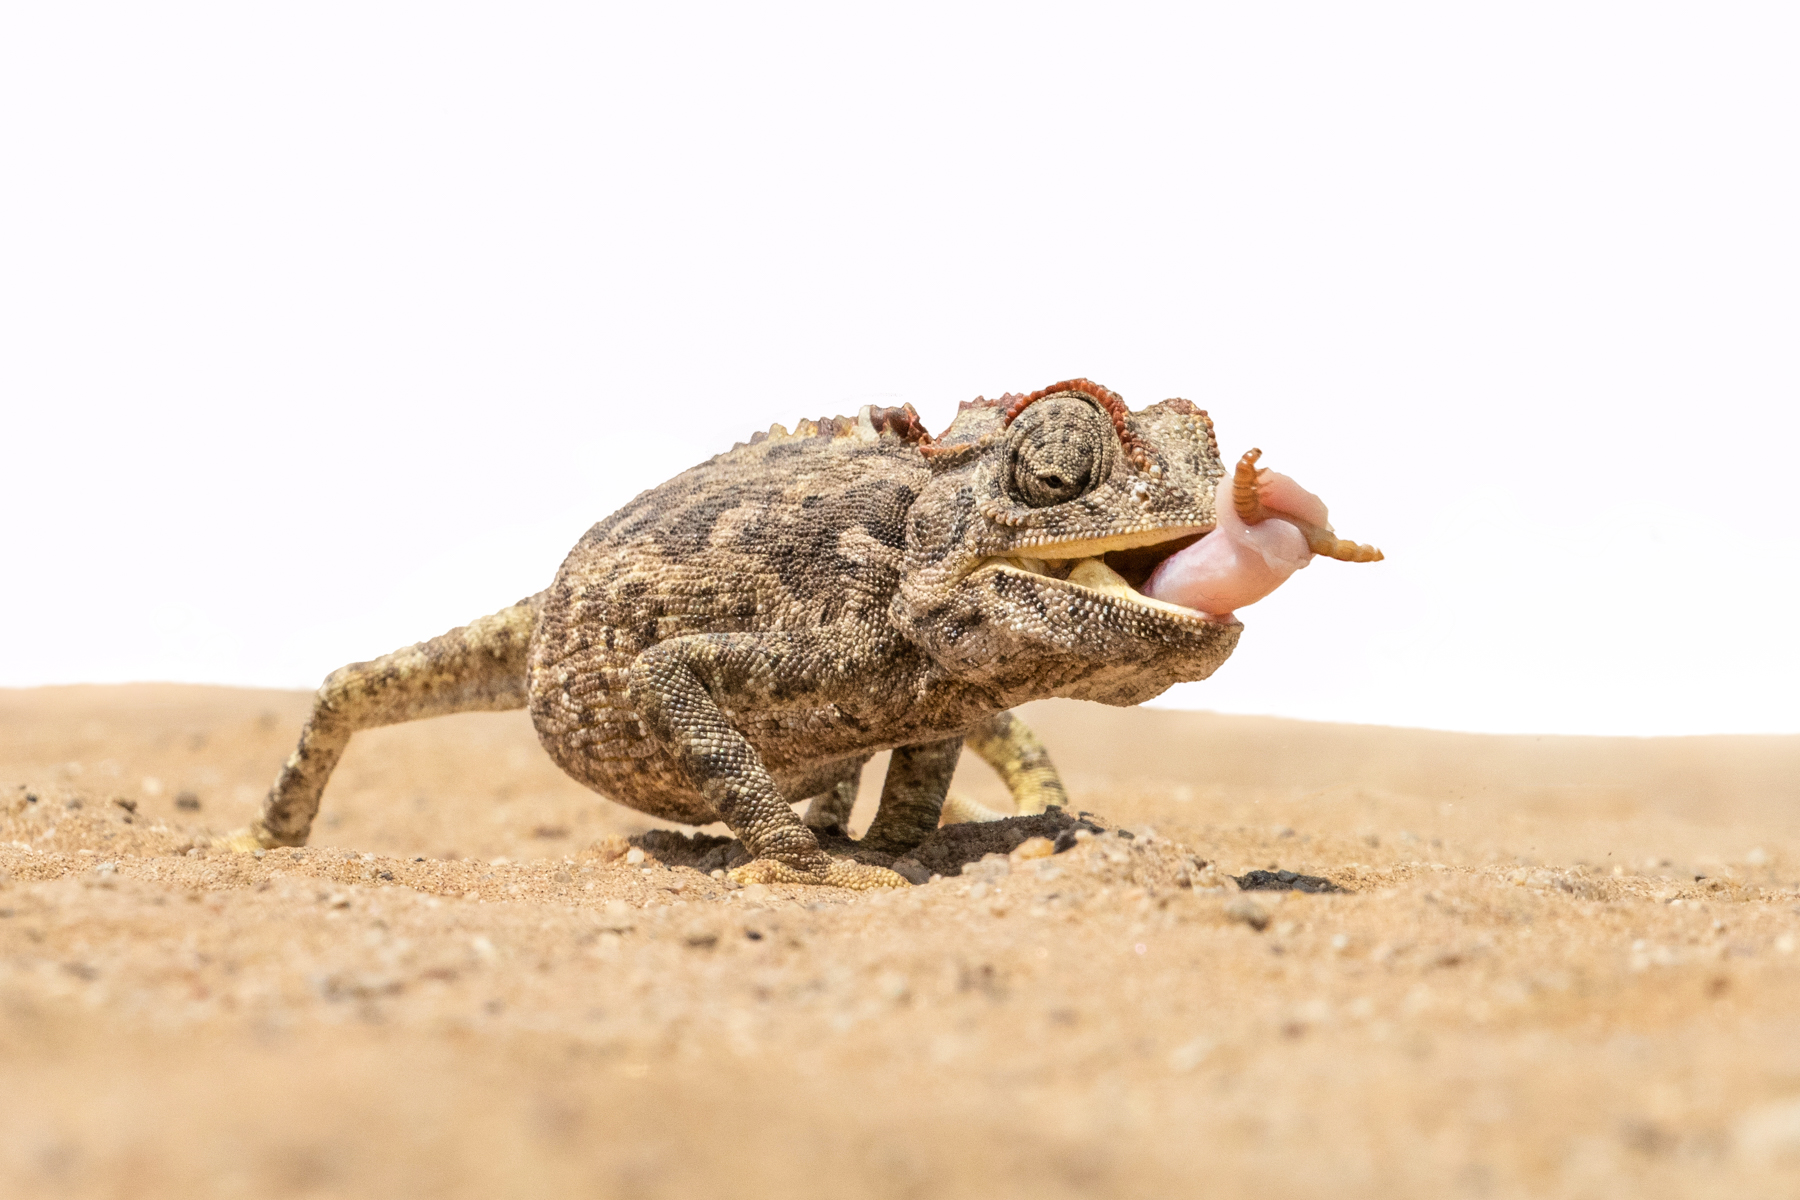 Who knew? A Namaqua Chameleon actually 'grabs' its meals using the end of its tongue!